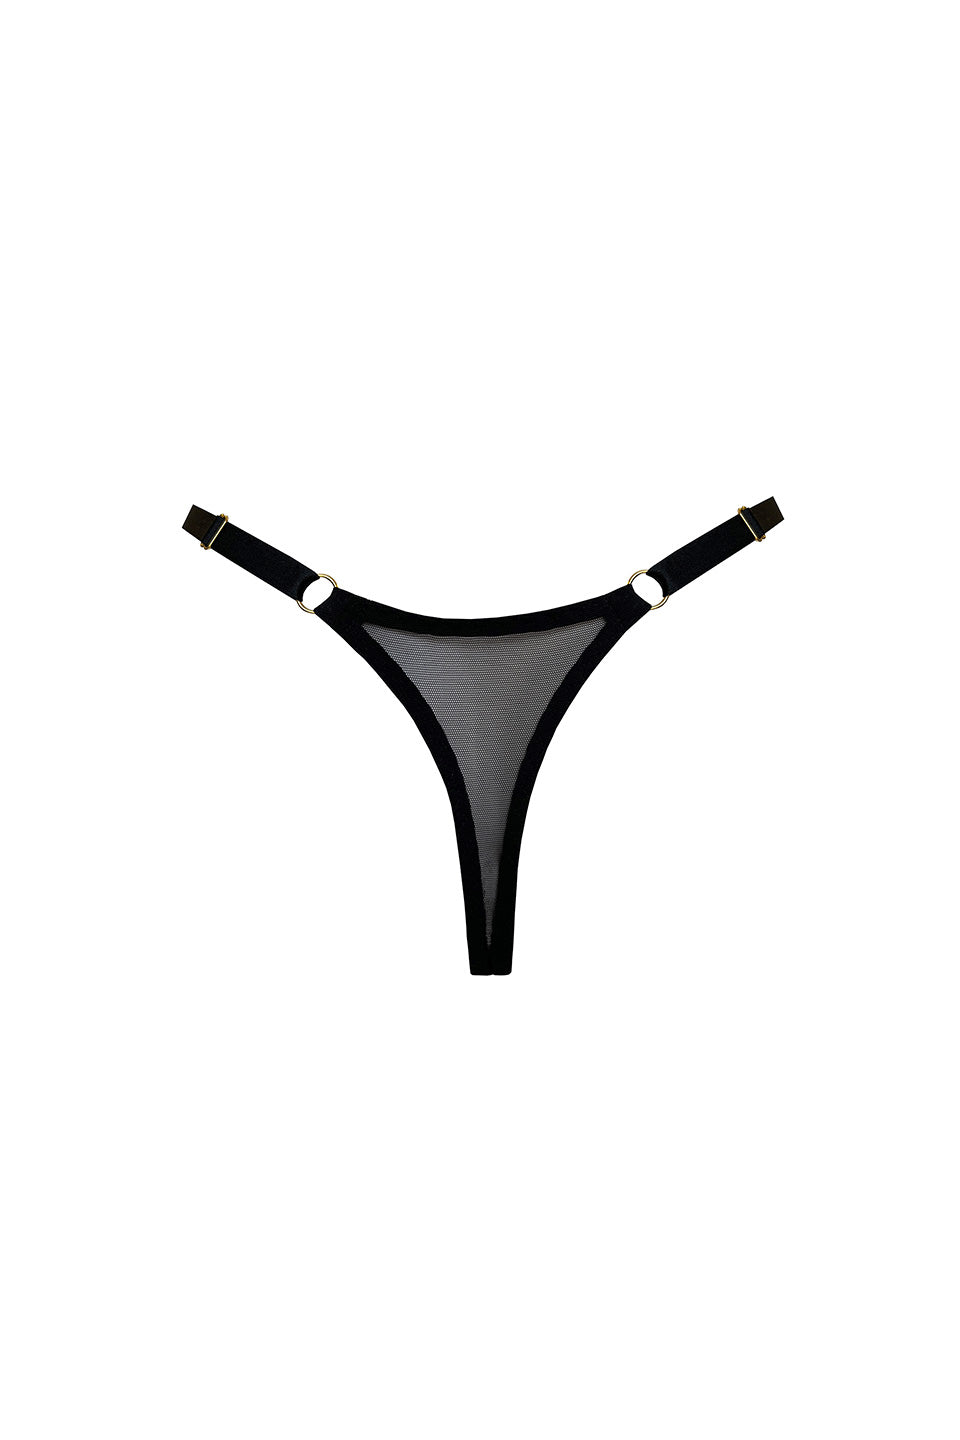 Designer Black Undergarments, shop online with free delivery in UAE. Product gallery 2